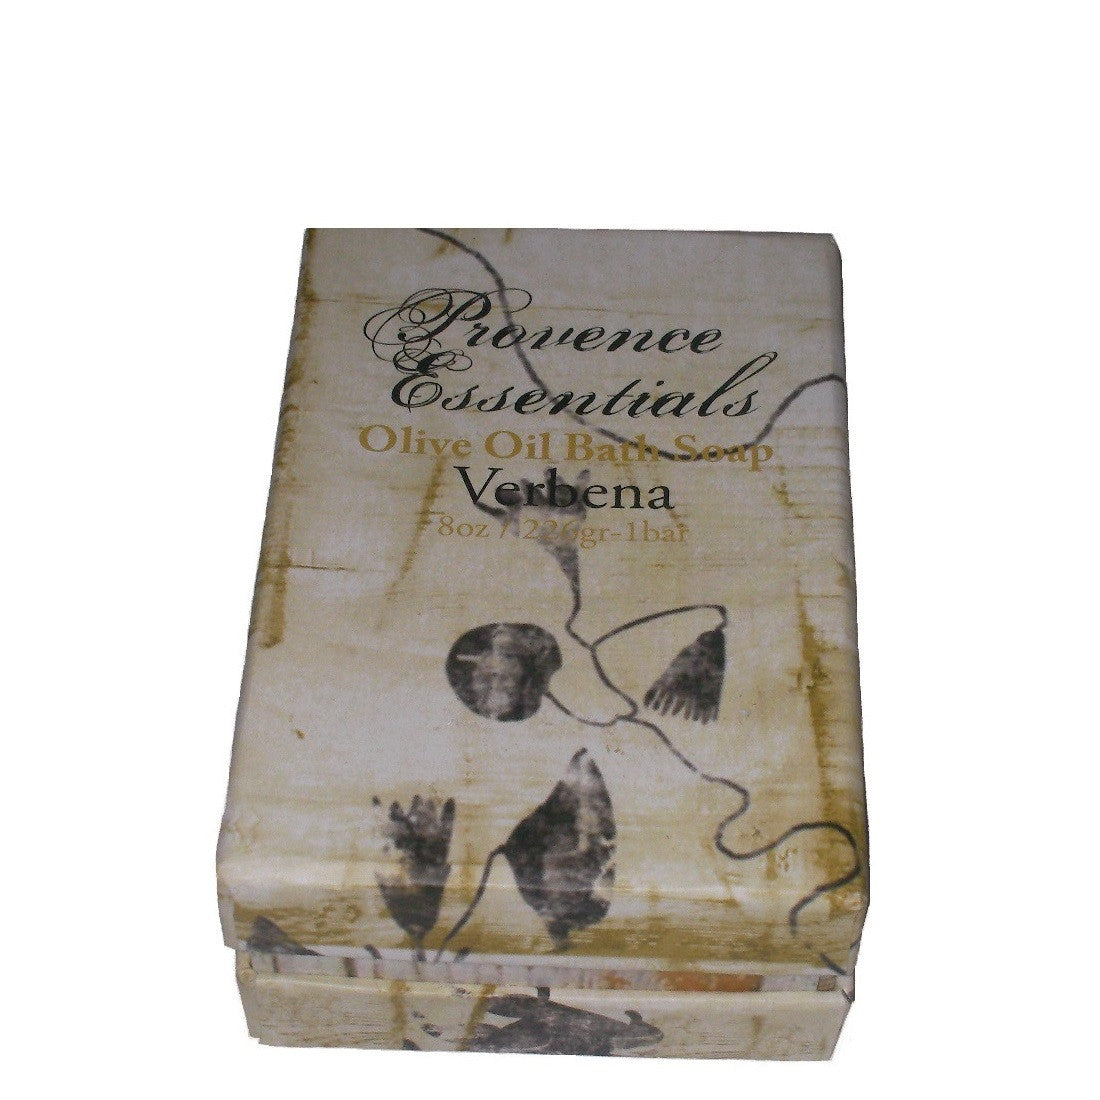 Scented Soap - Verbena Olive Oil Soap by Provence Essentials Angled View To Show Depth Of Box